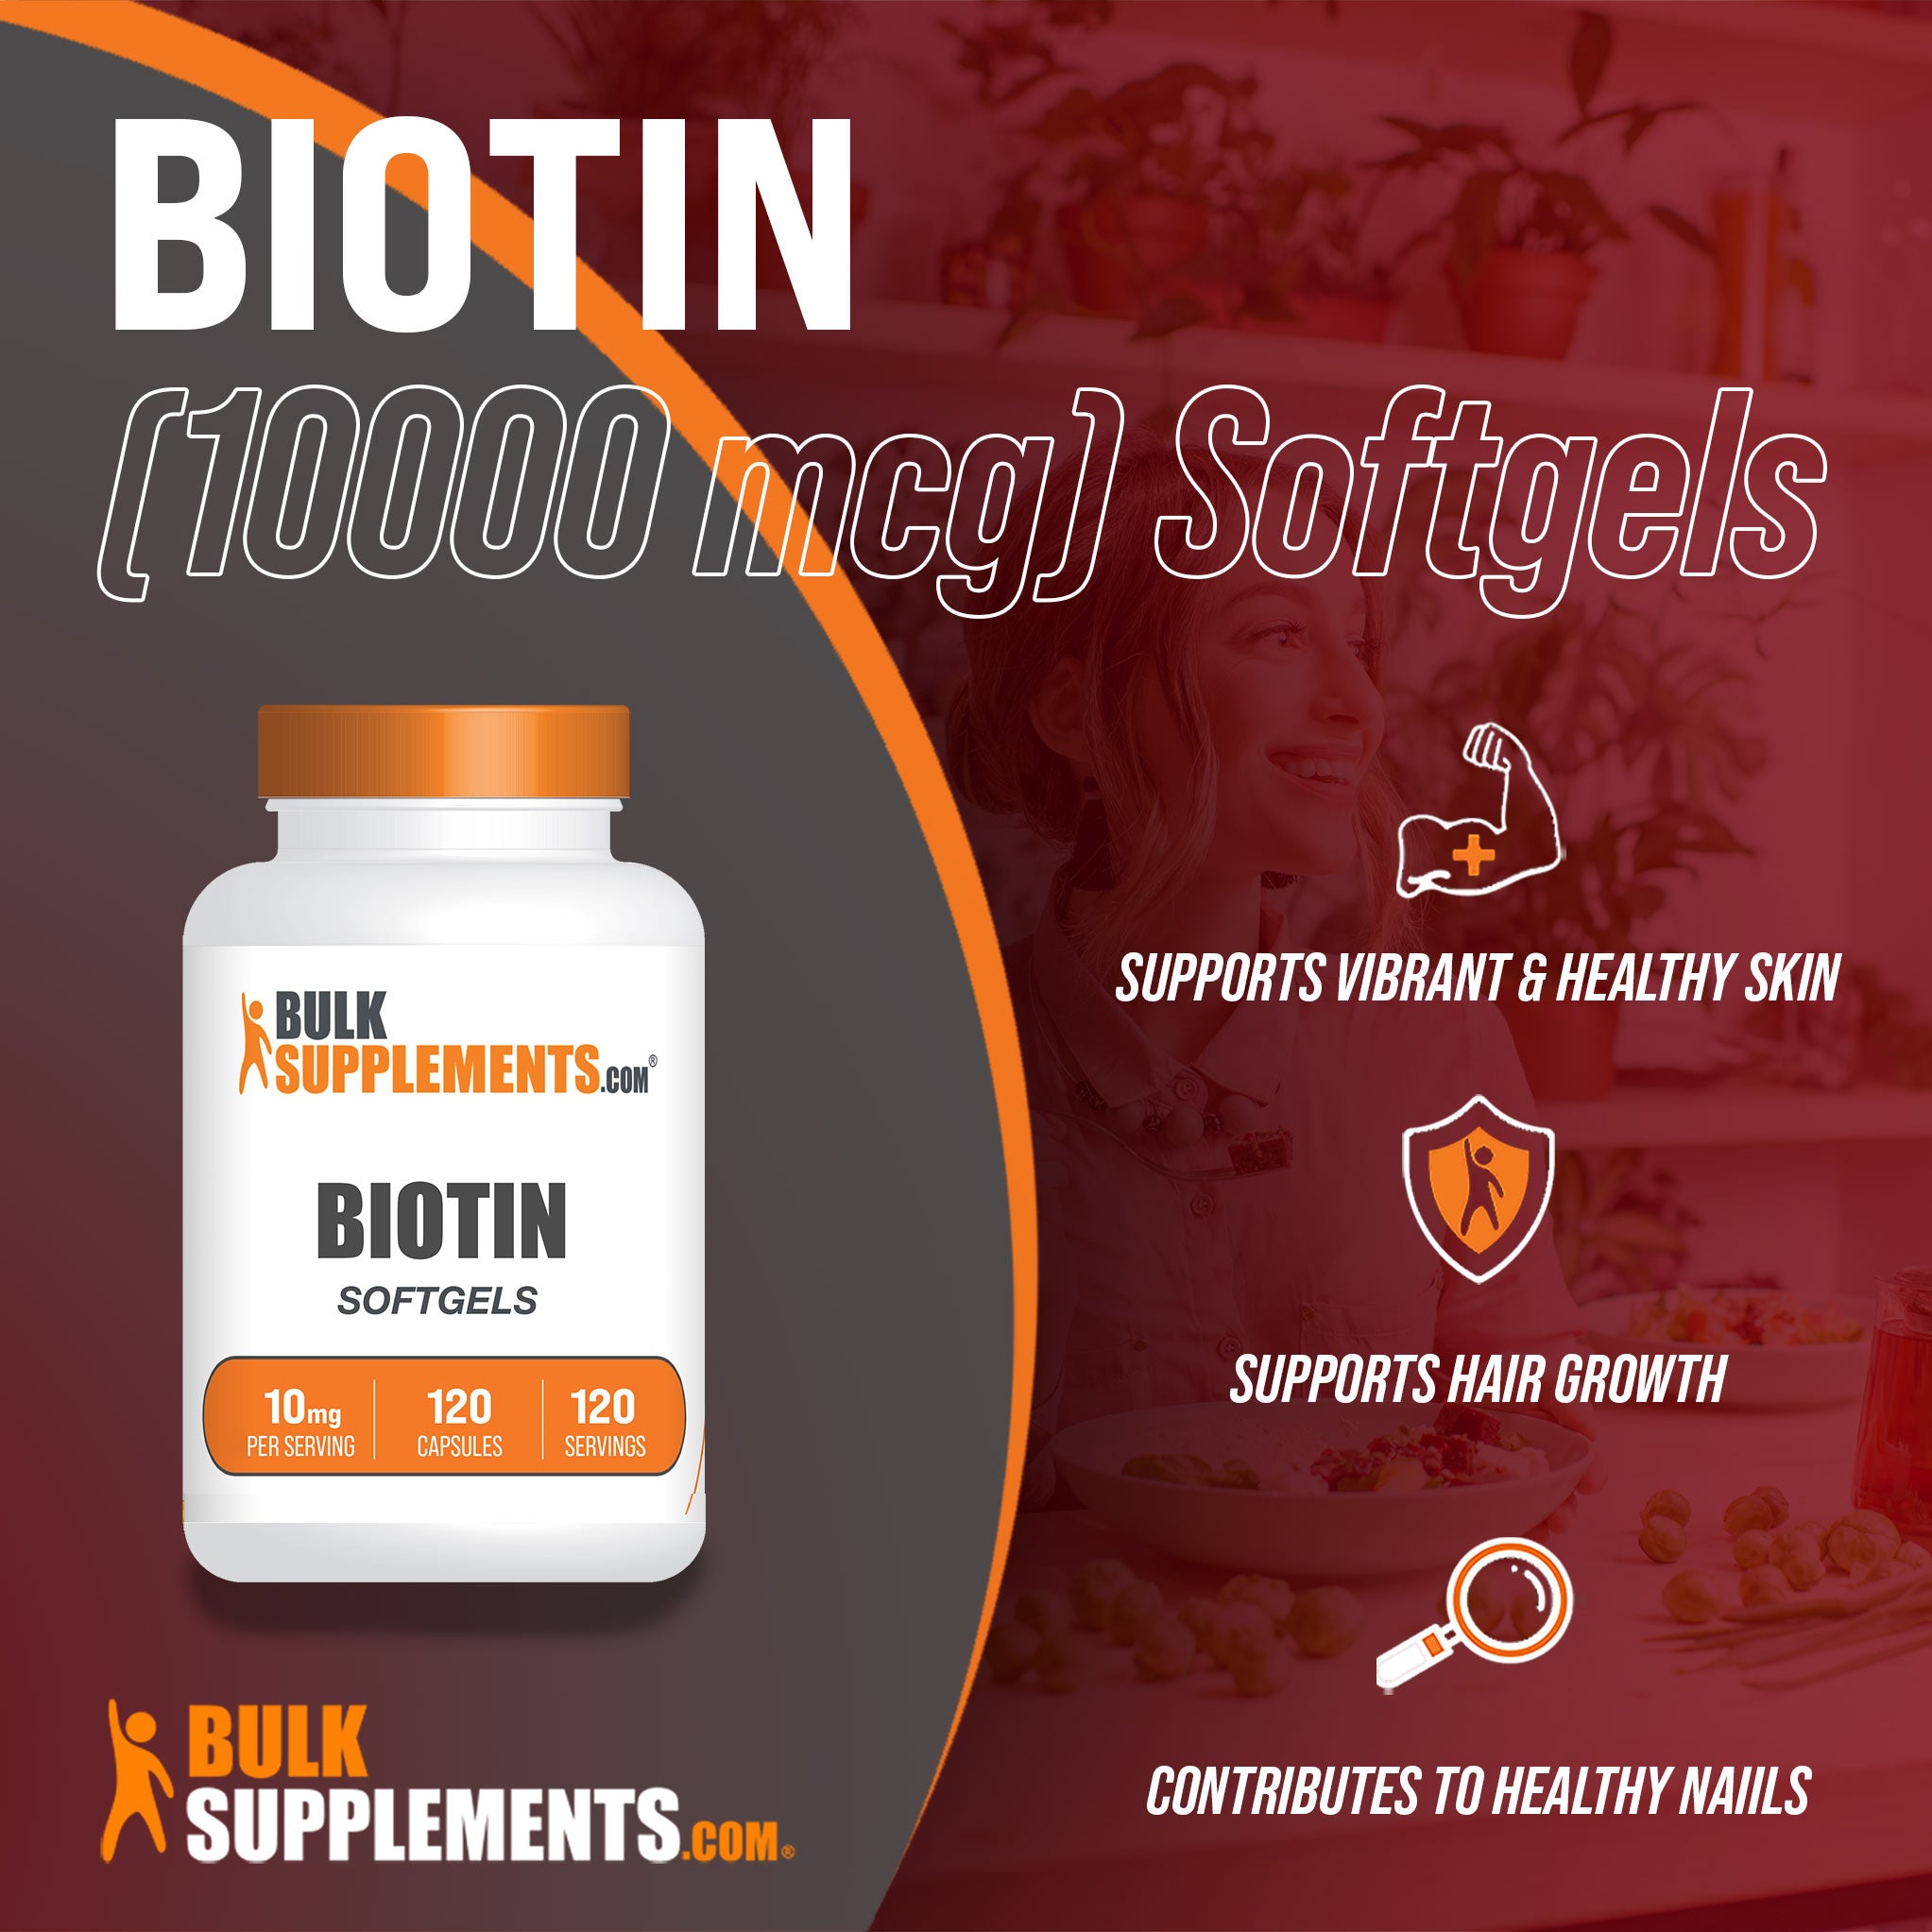 Benefits of Biotin Softgels; supports vibrant & healthy skin, supports hair growth, contributes to healthy nails